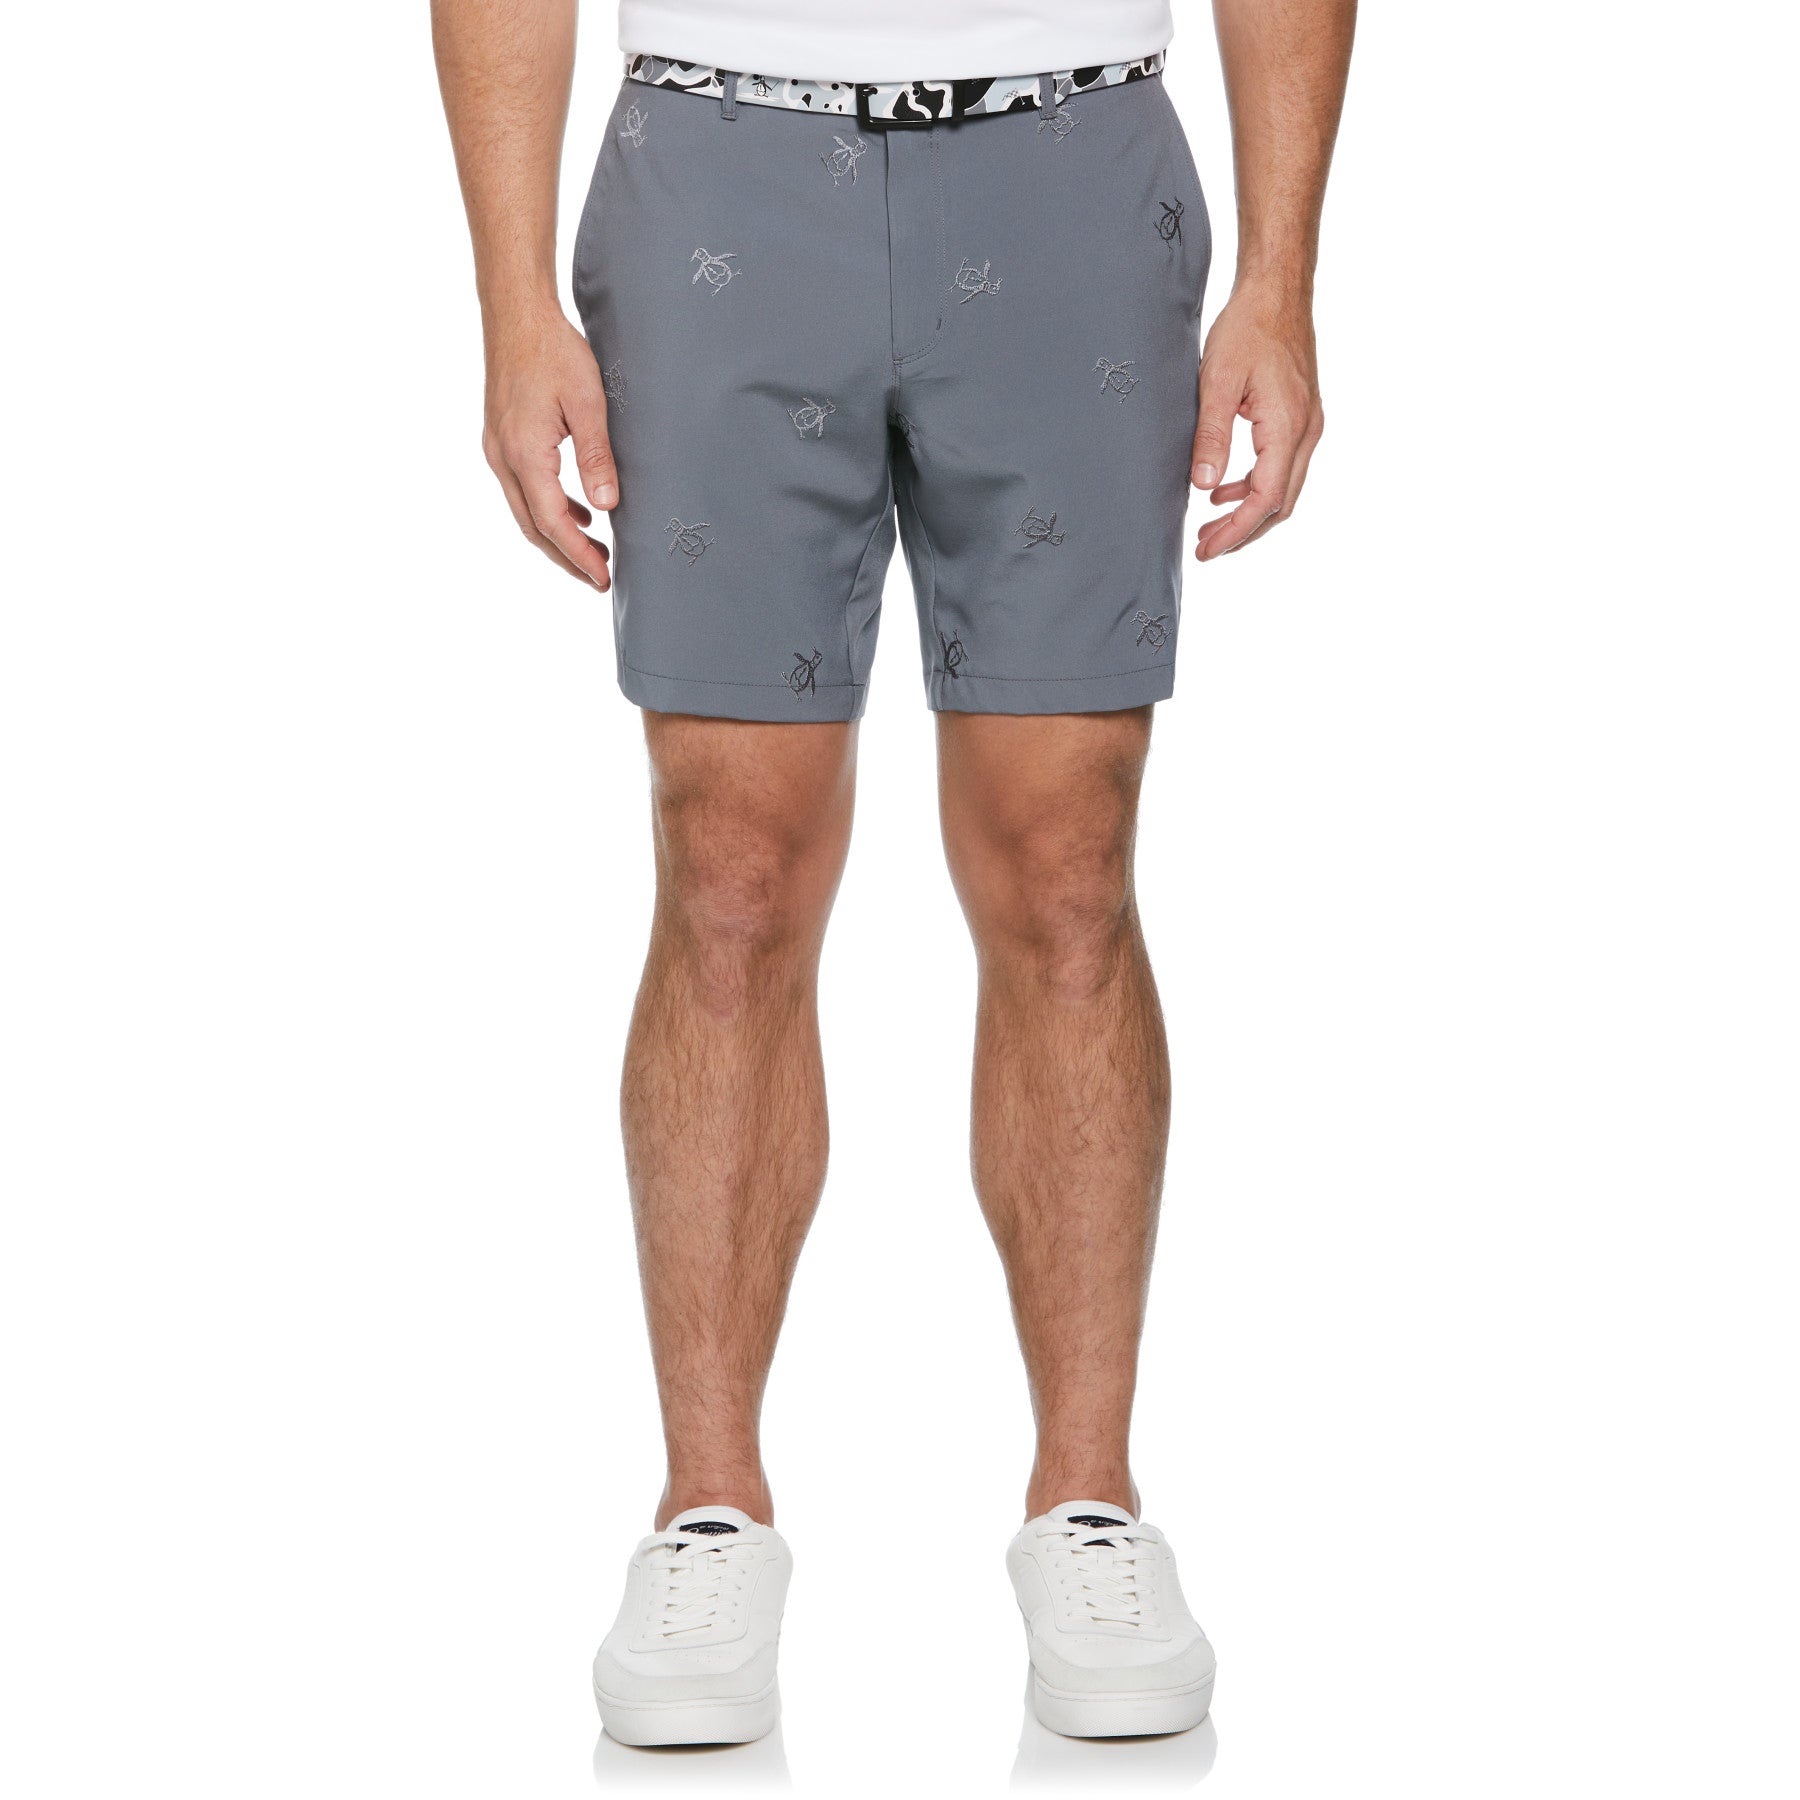 View Pete Embroidered Flat Front Golf Shorts In Quiet Shade information